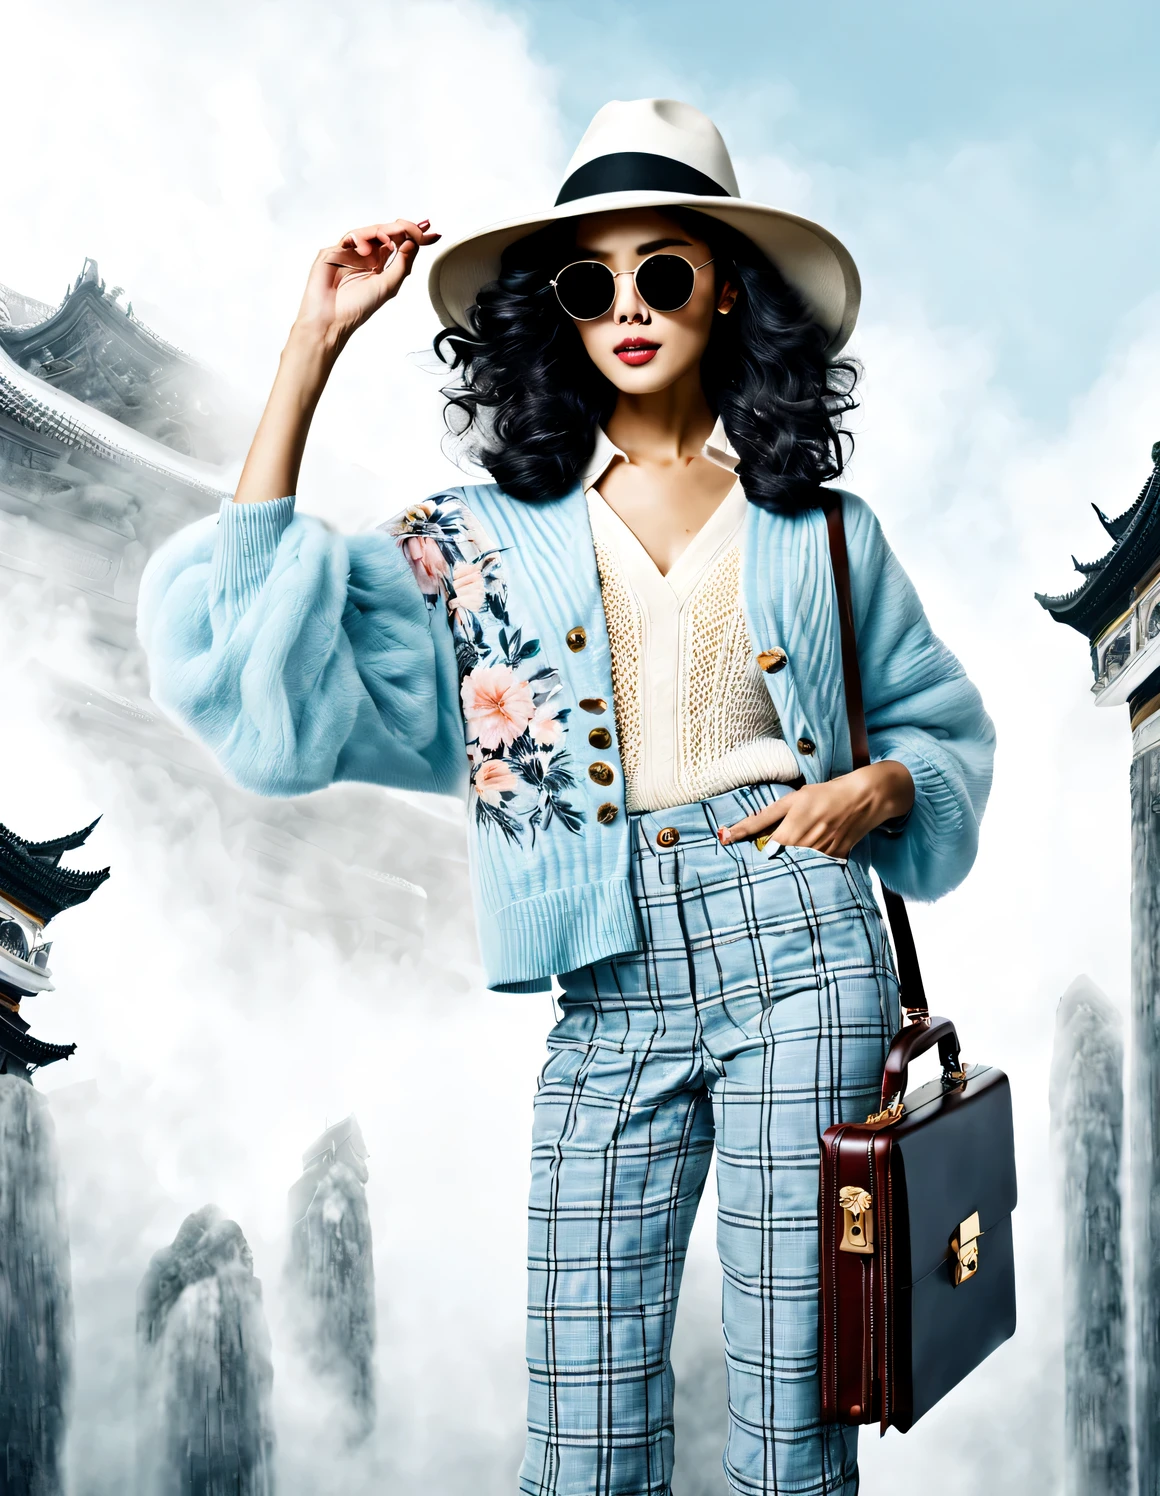 (Modern art dance simple poster design), (Half-length close-up), (Beautiful Chinese girl waving briefcase in the air,), (Wearing sunglasses and a hat: 1.2), Characterized by exquisite details and layering, The pastel tones of a light blue jacket and an off-white floral sweater blend together, Black and white plaid pants also have a sharp contrast, Create an elegant and modern urban style， Wear modern and stylish winter fashion, slim waist, high nose bridge, look up posture, sad but beautiful, slender figure, Exquisite facial features, swirling fog illustration, ink painting, black hair, Princess curly long hair, Proudly, Surrealism, contemporary art photography, action illustration, abstract expressionism, pixar, depth of field, motion blur, backlight, Fall out, decline, look up, Sony FE General Manager, ultra high definition, masterpiece, Accuracy, textured skin, Super details, high detail, high quality, Award-winning, best quality, Grade, 16K, Photographed from a bottom-up angle,